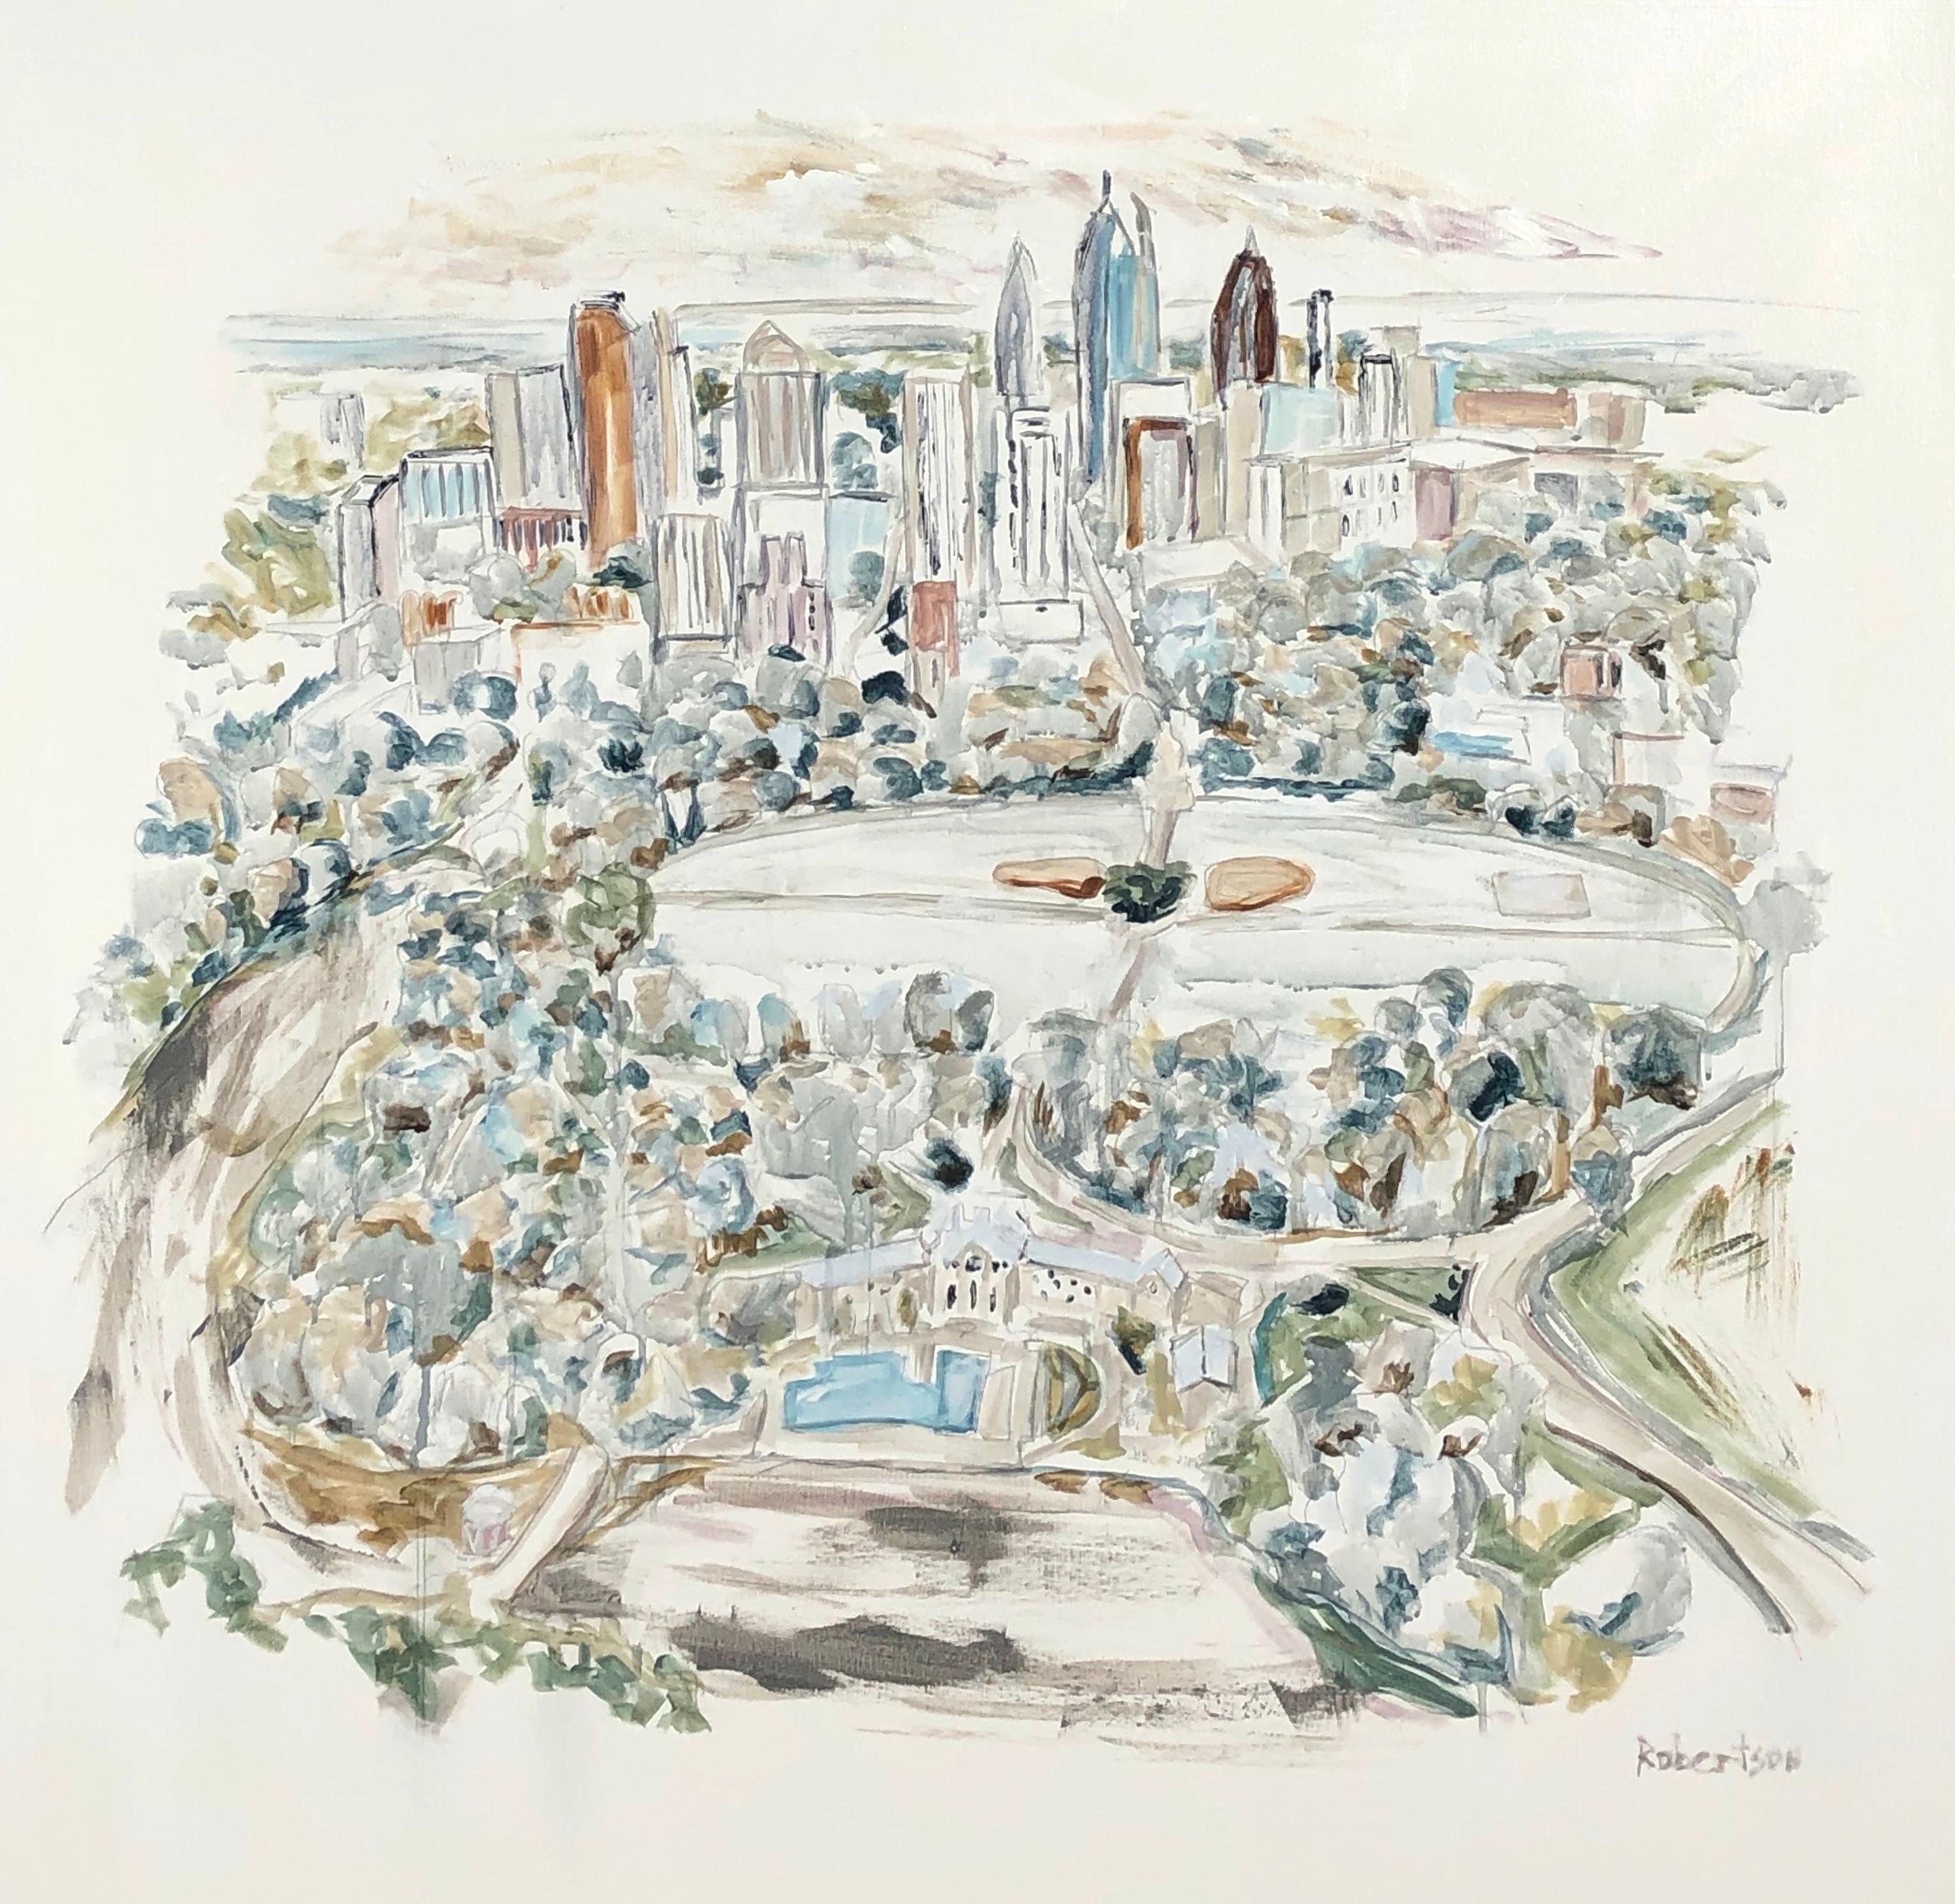 'Atlanta, Piedmont Park' is a medium size Impressionist mixed media on canvas landscape painting created by American artist Sarah Robertson in 2020. Featuring a soft palette playing beautifully with negative space, the painting depicts the elegant